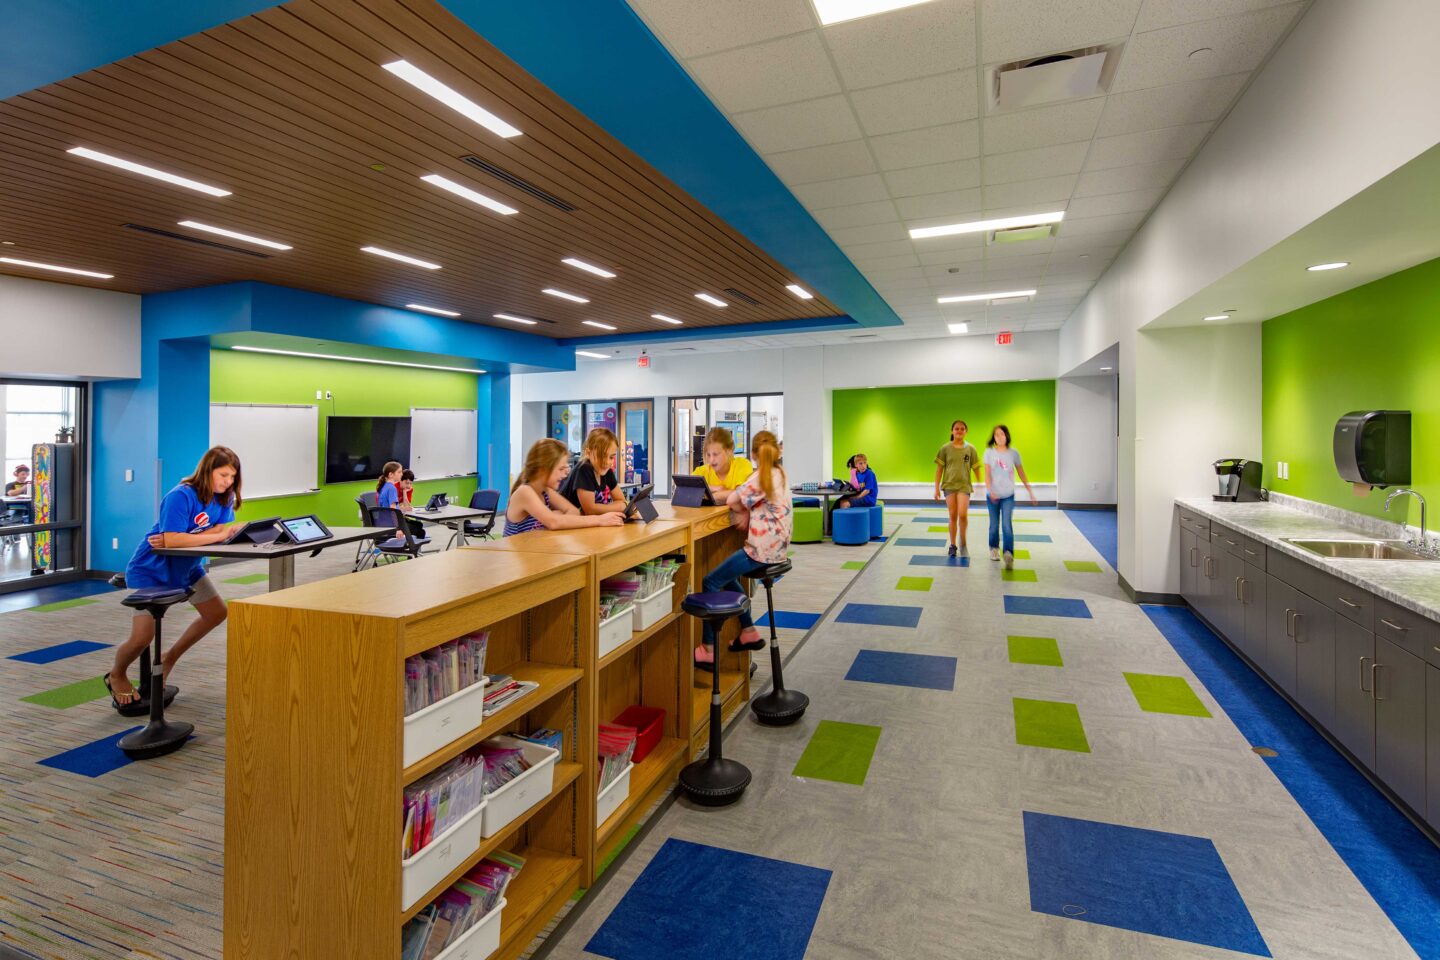 View of a collaboration space accented with bright colors that is lined with low shelves and a sink area at Eleva-Strum Elementary School